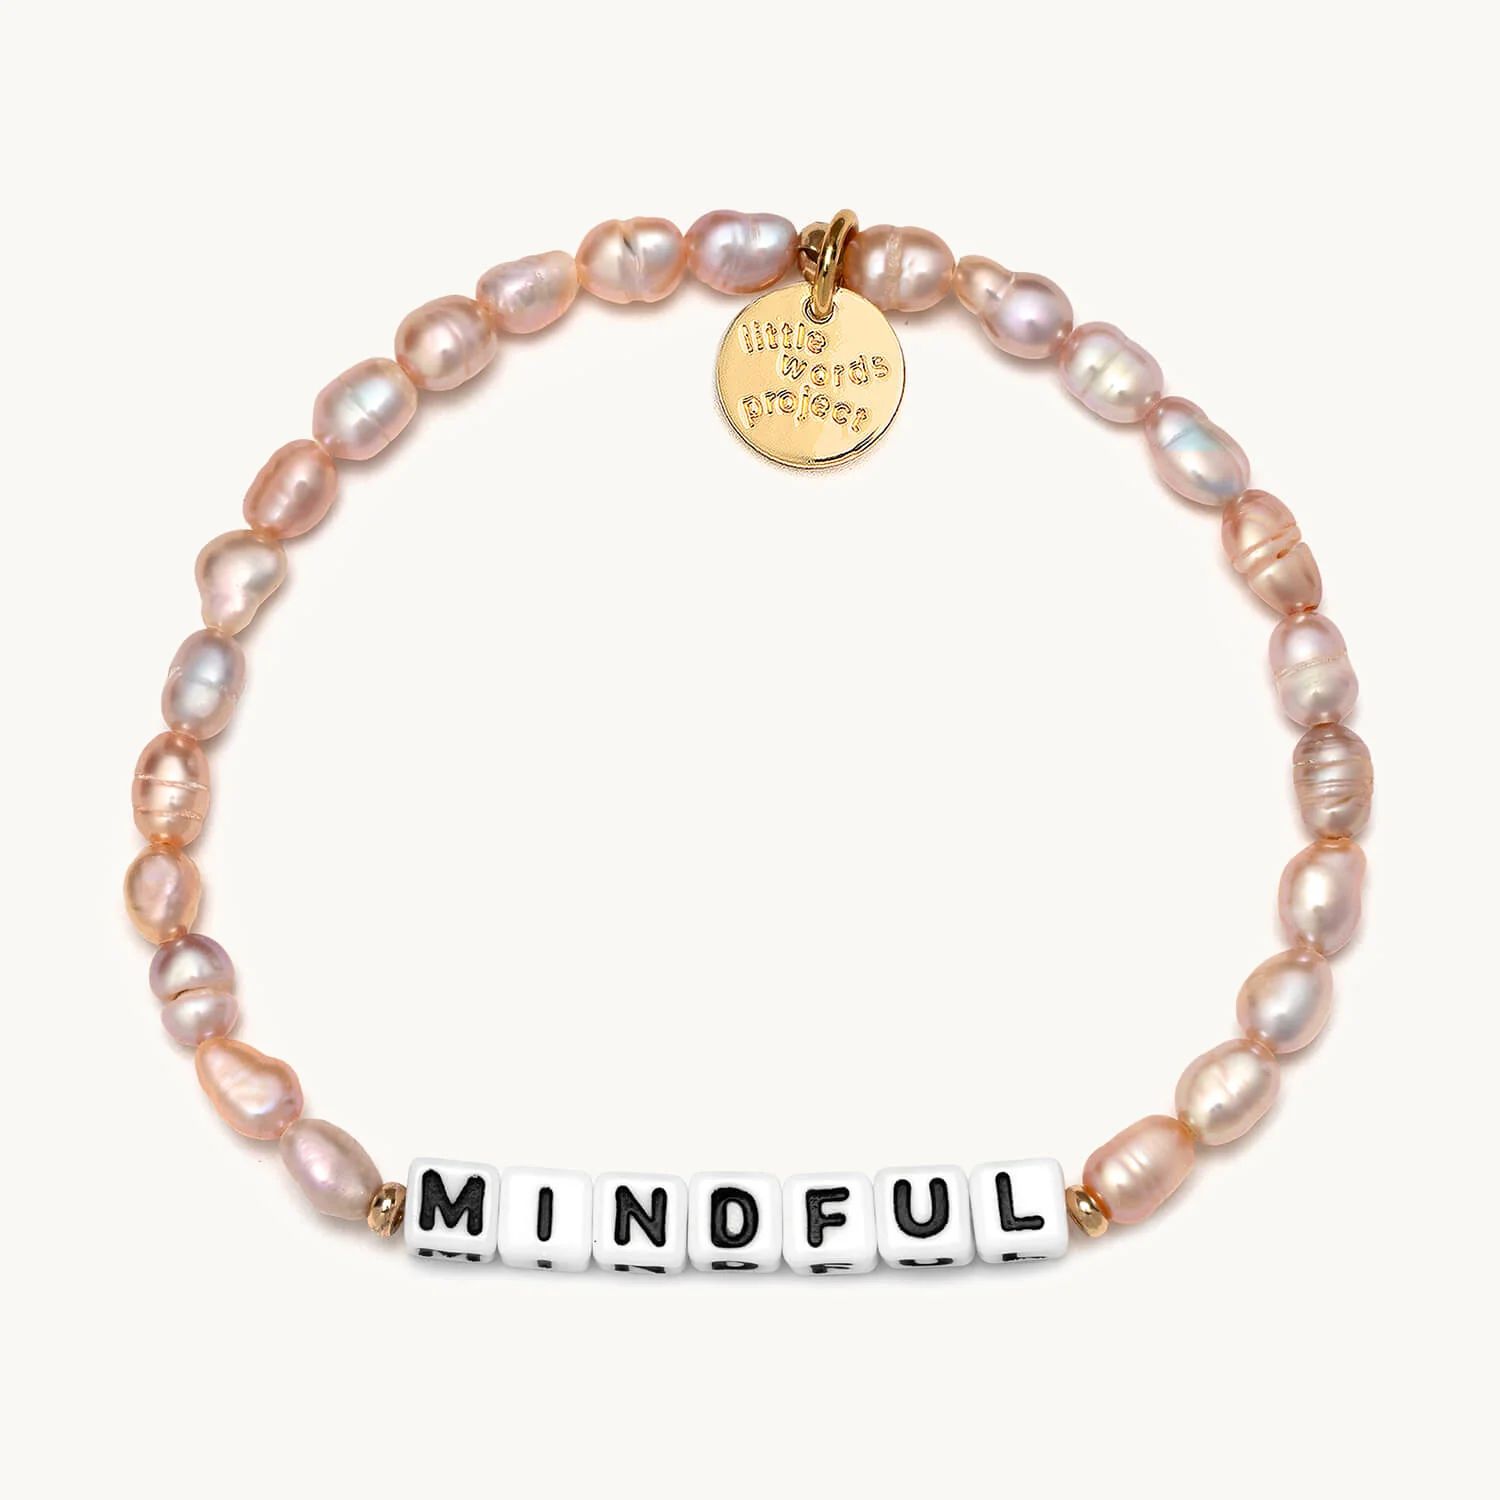 Mindful- Freshwater Pearl | Little Words Project